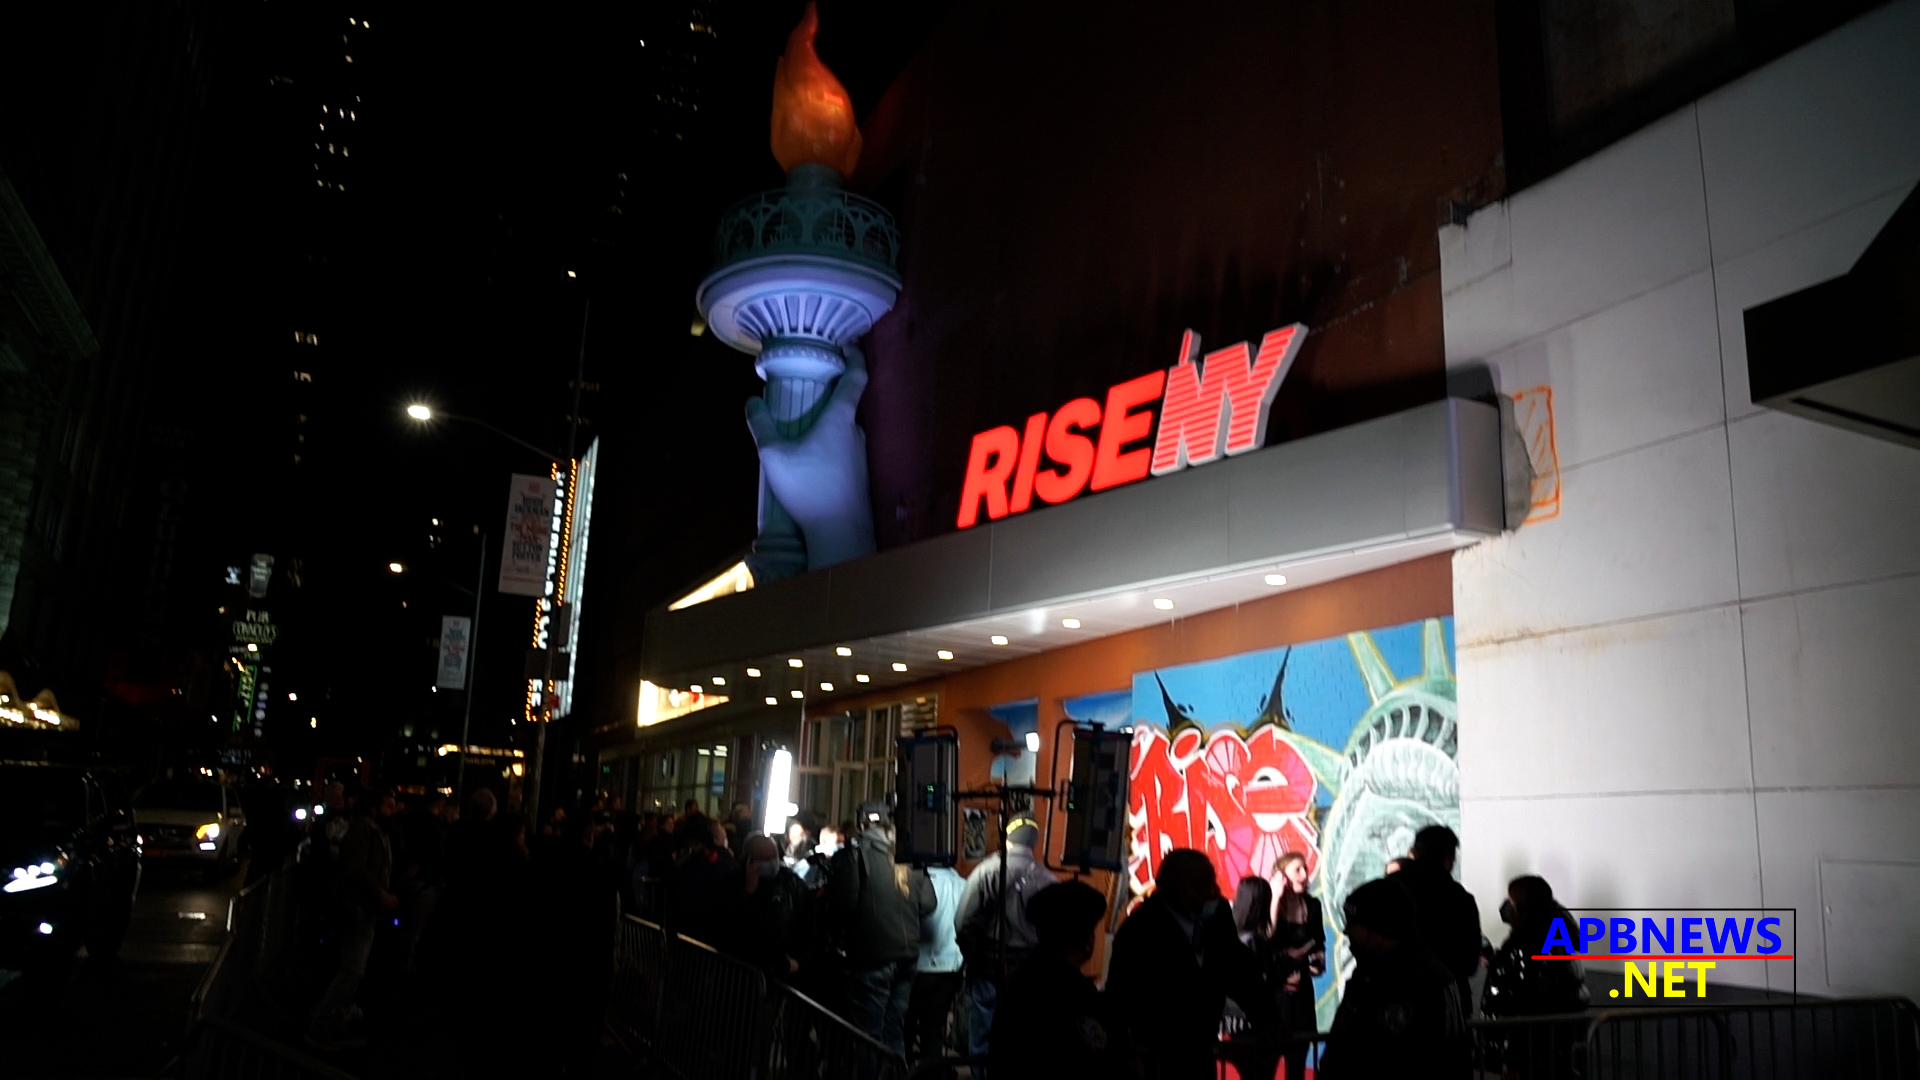 The Grand Opening Celebration of RiseNY, a first-of-its-kind new attraction in Times Square